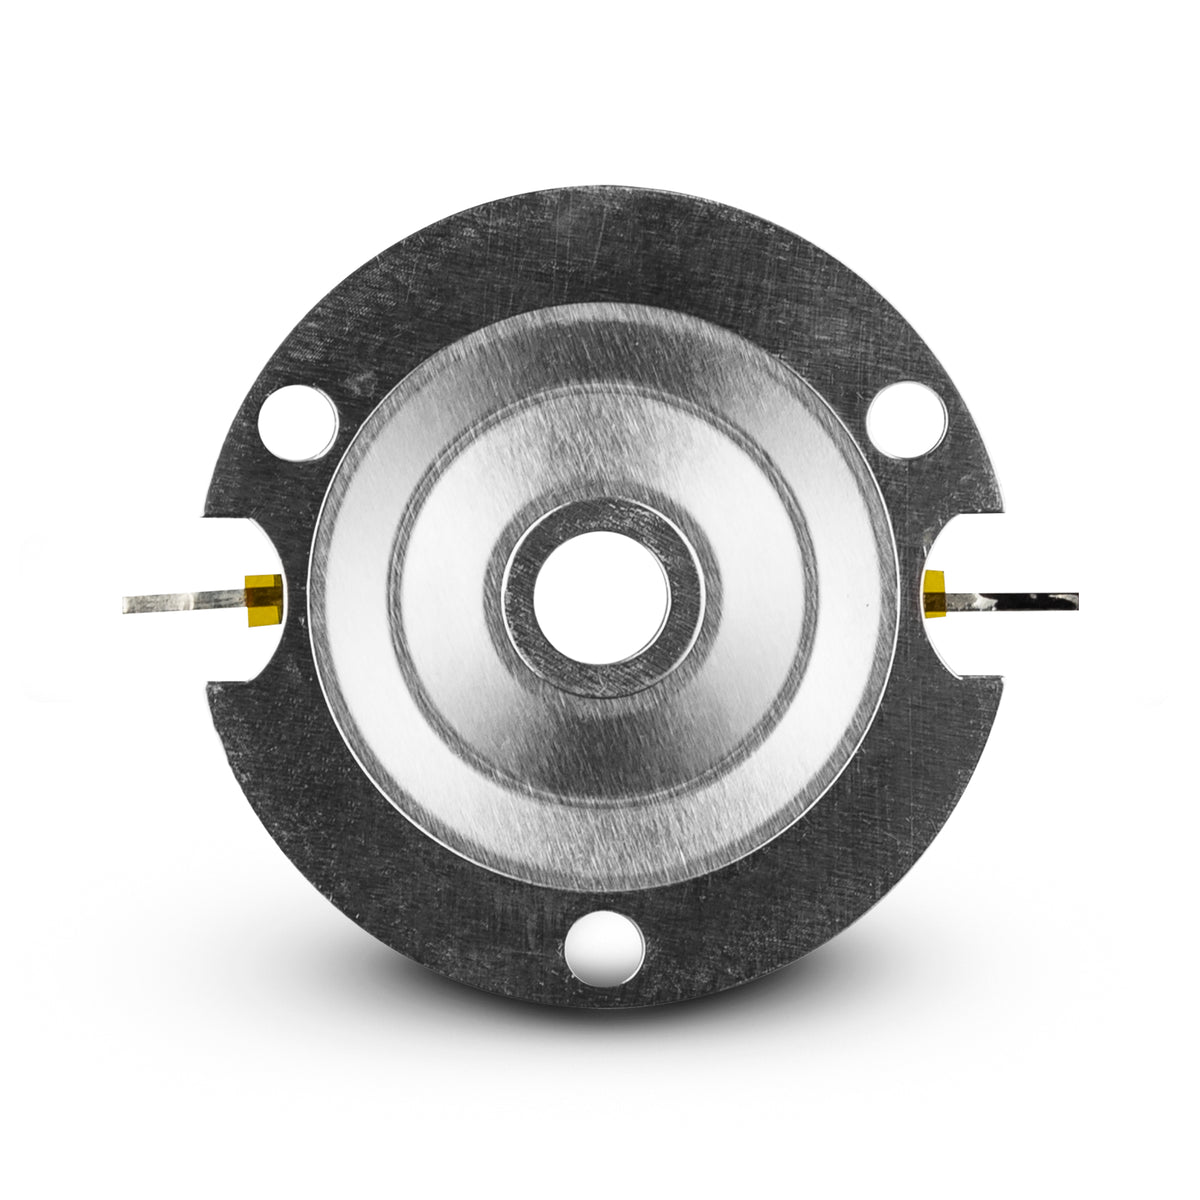 PRO Replacement Diaphragm for PRO-HY6.4B, PRO-HY8.4B, PRO-HY69.4B,PRO-HY6.4MSL,PRO-HY8.4MSL Loudspeaker Drivers